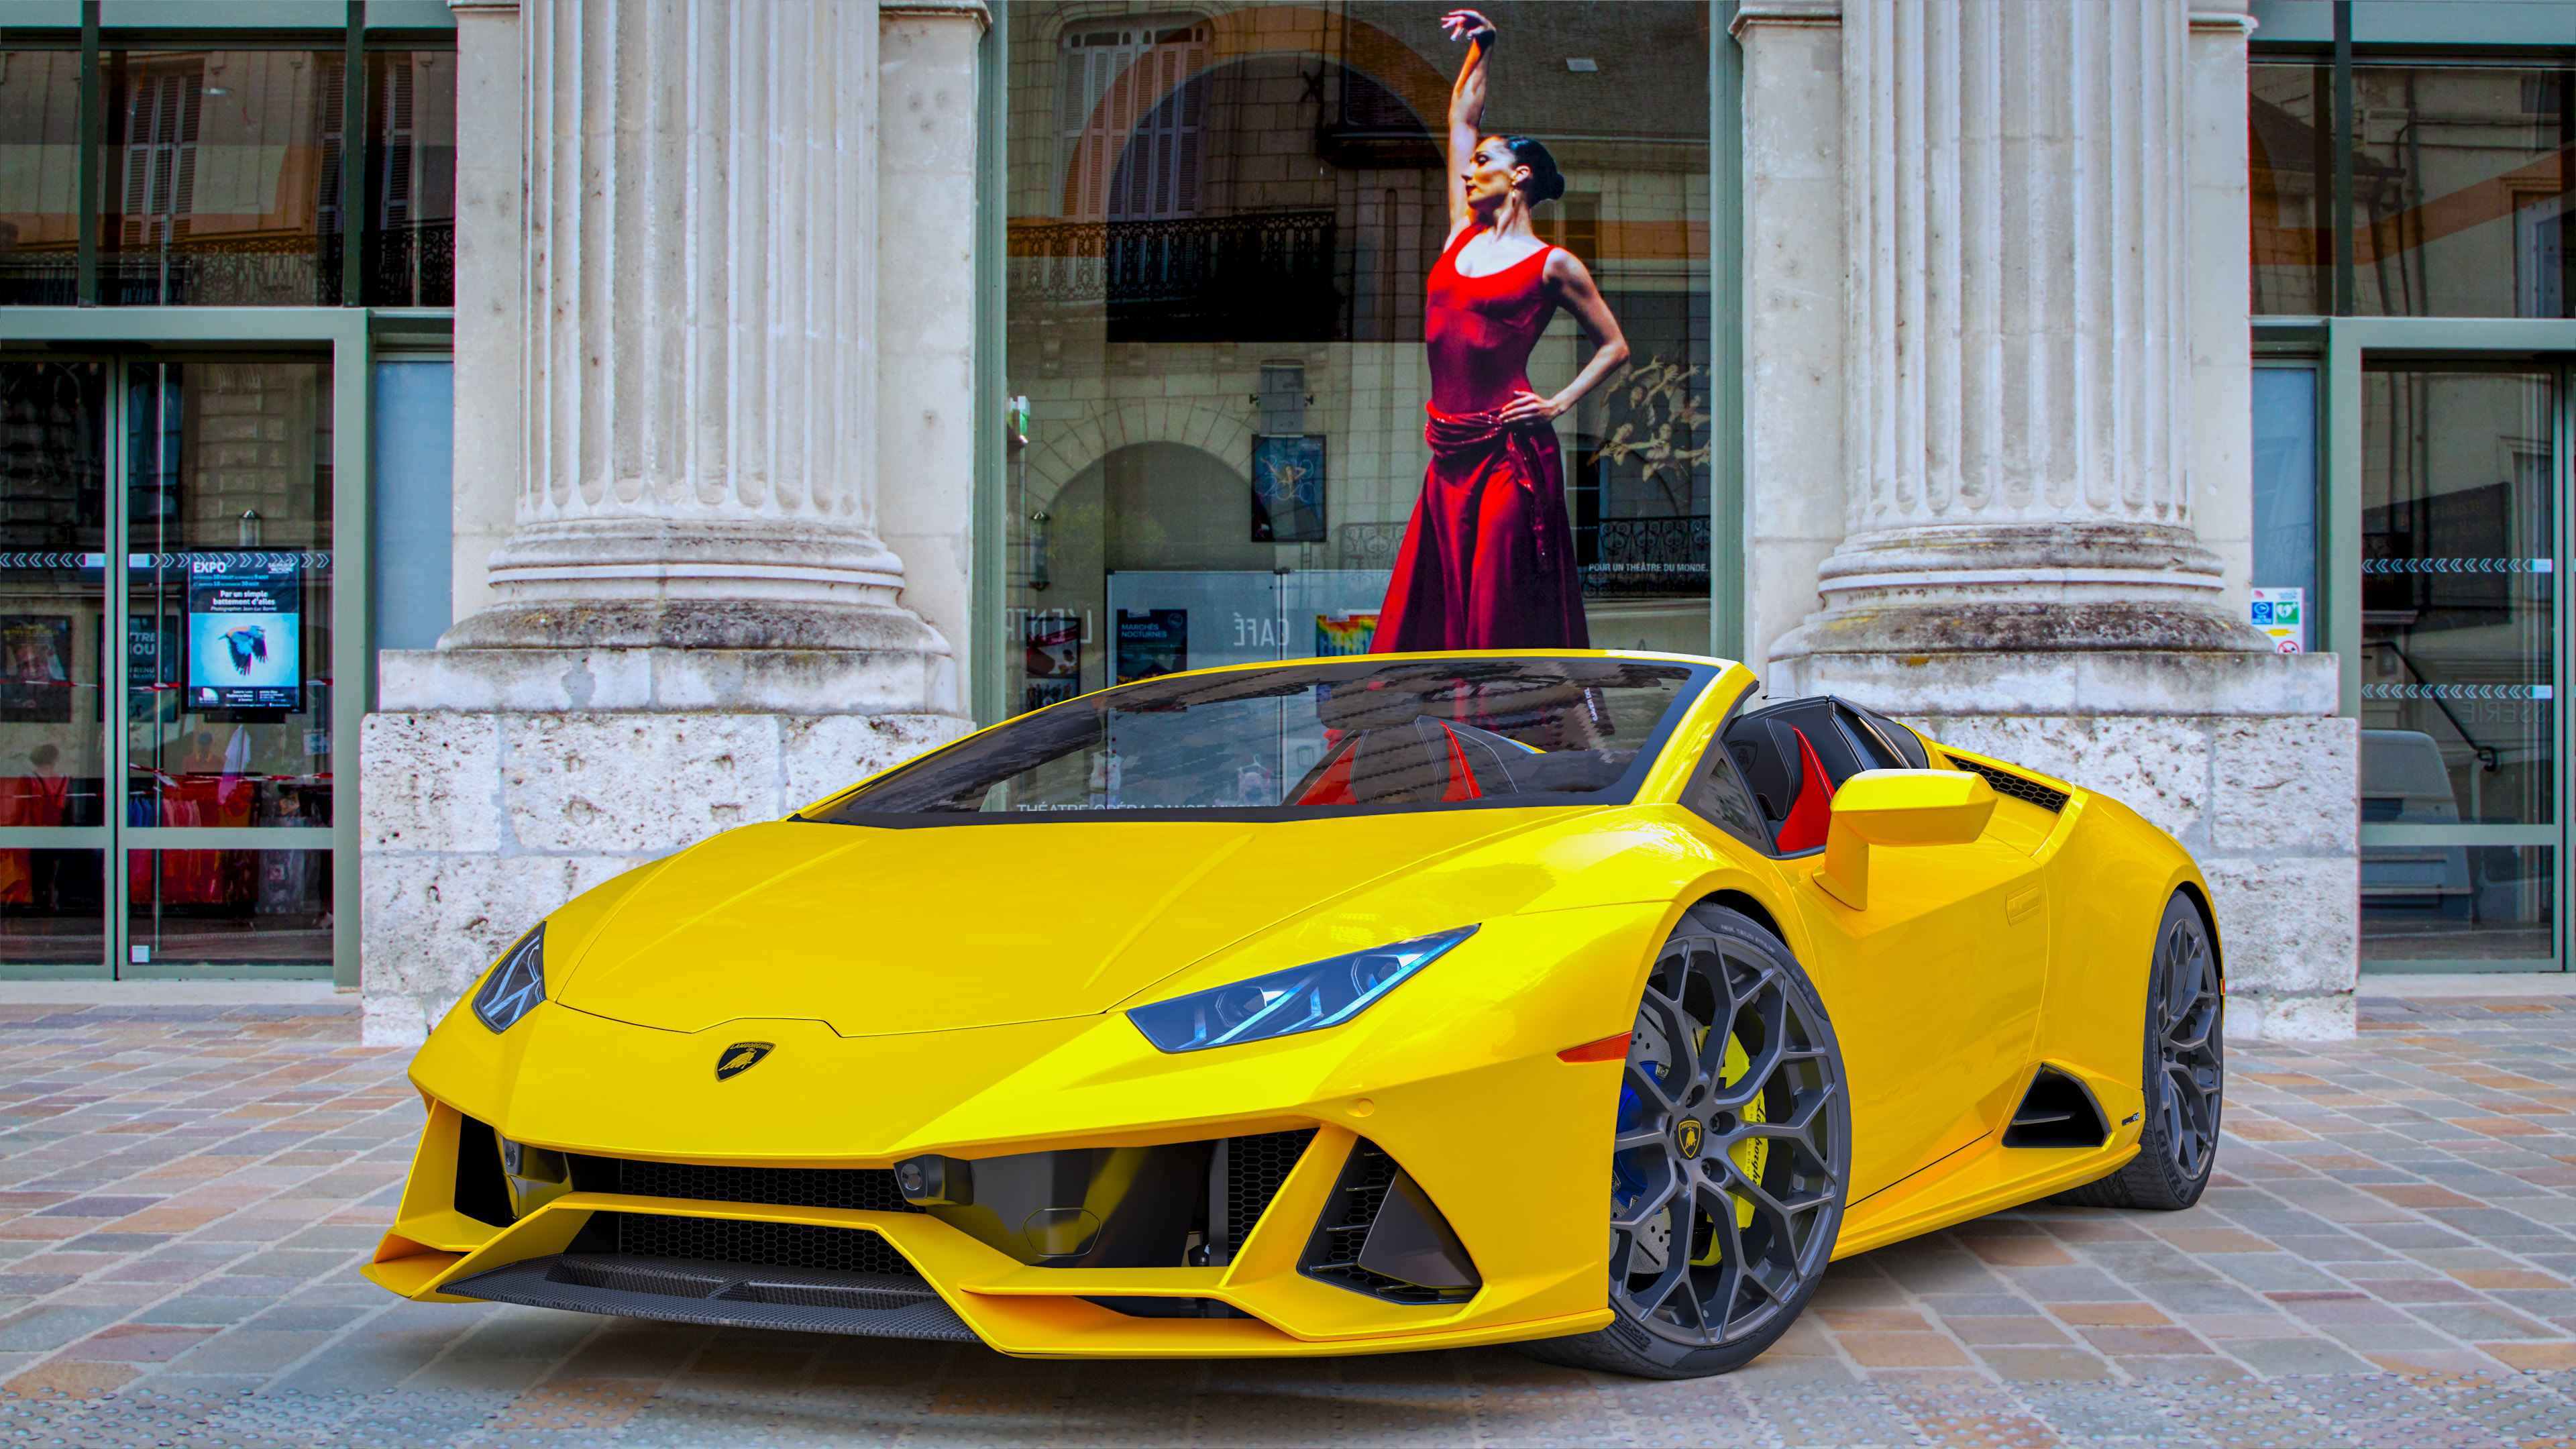 Immerse in the world of supercars with our car desktop wallpaper showcasing the yellow Lamborghini Huracan Evo Spyder, an icon of Italian craftsmanship.